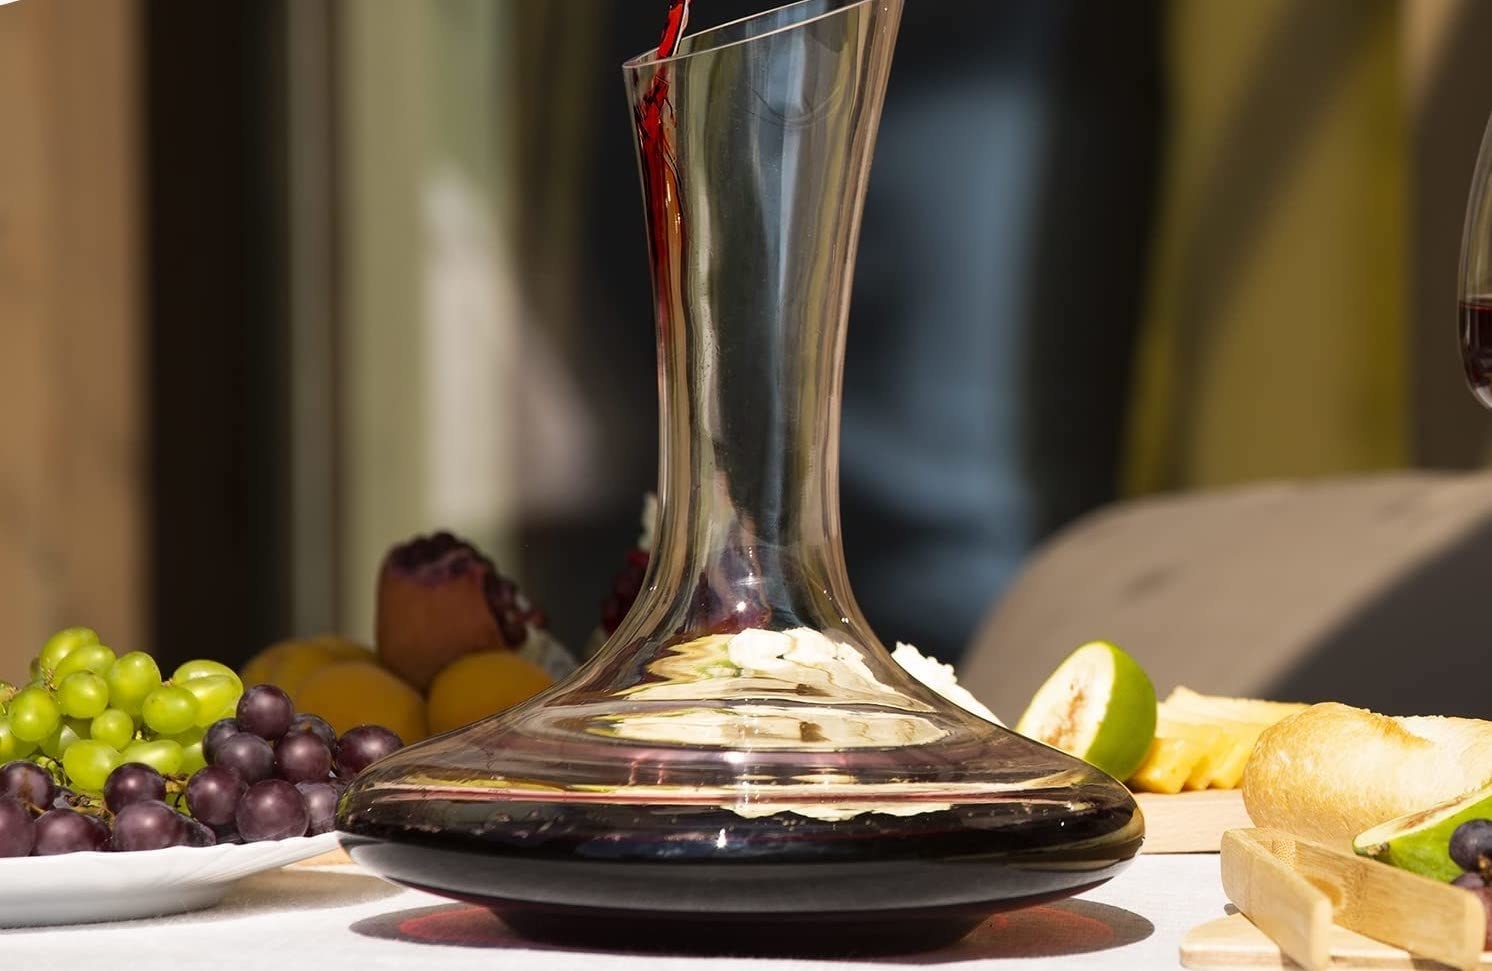 Wine being poured into a decanter on a table with fruit and crackers surrounding it